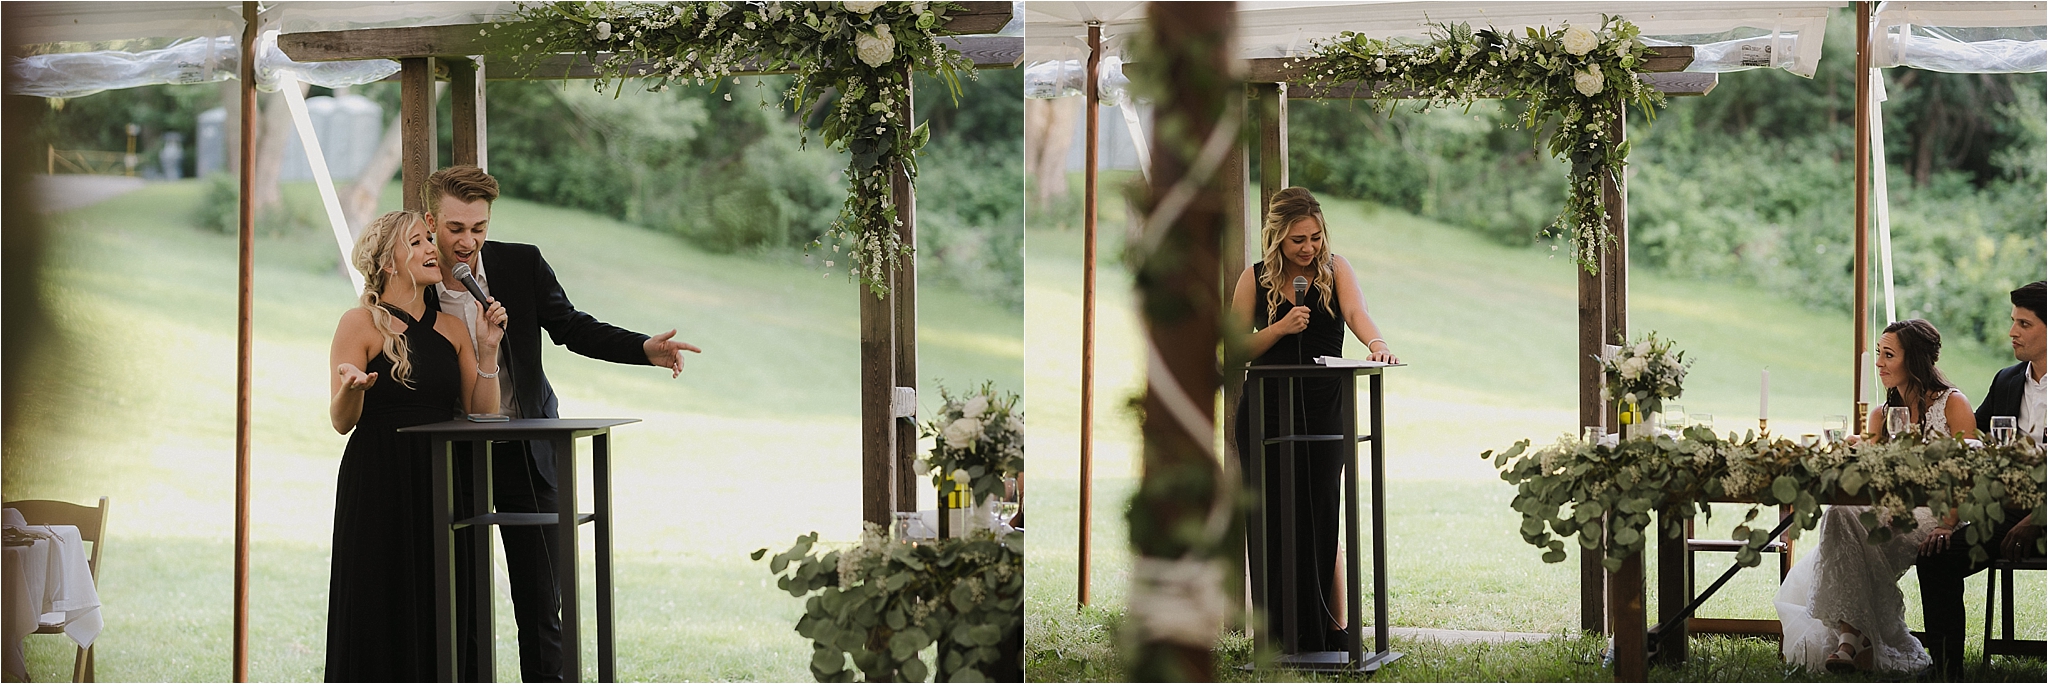 summer, wedding, st. catharines, ontario, chic, boho, public park, tented wedding, greenery, garlands, green and white florals, flowers, bouquets, dog, dogs, pizza, midnight snack, church, ceremony, arbor, reception, budget, bridesmaid, dress, black